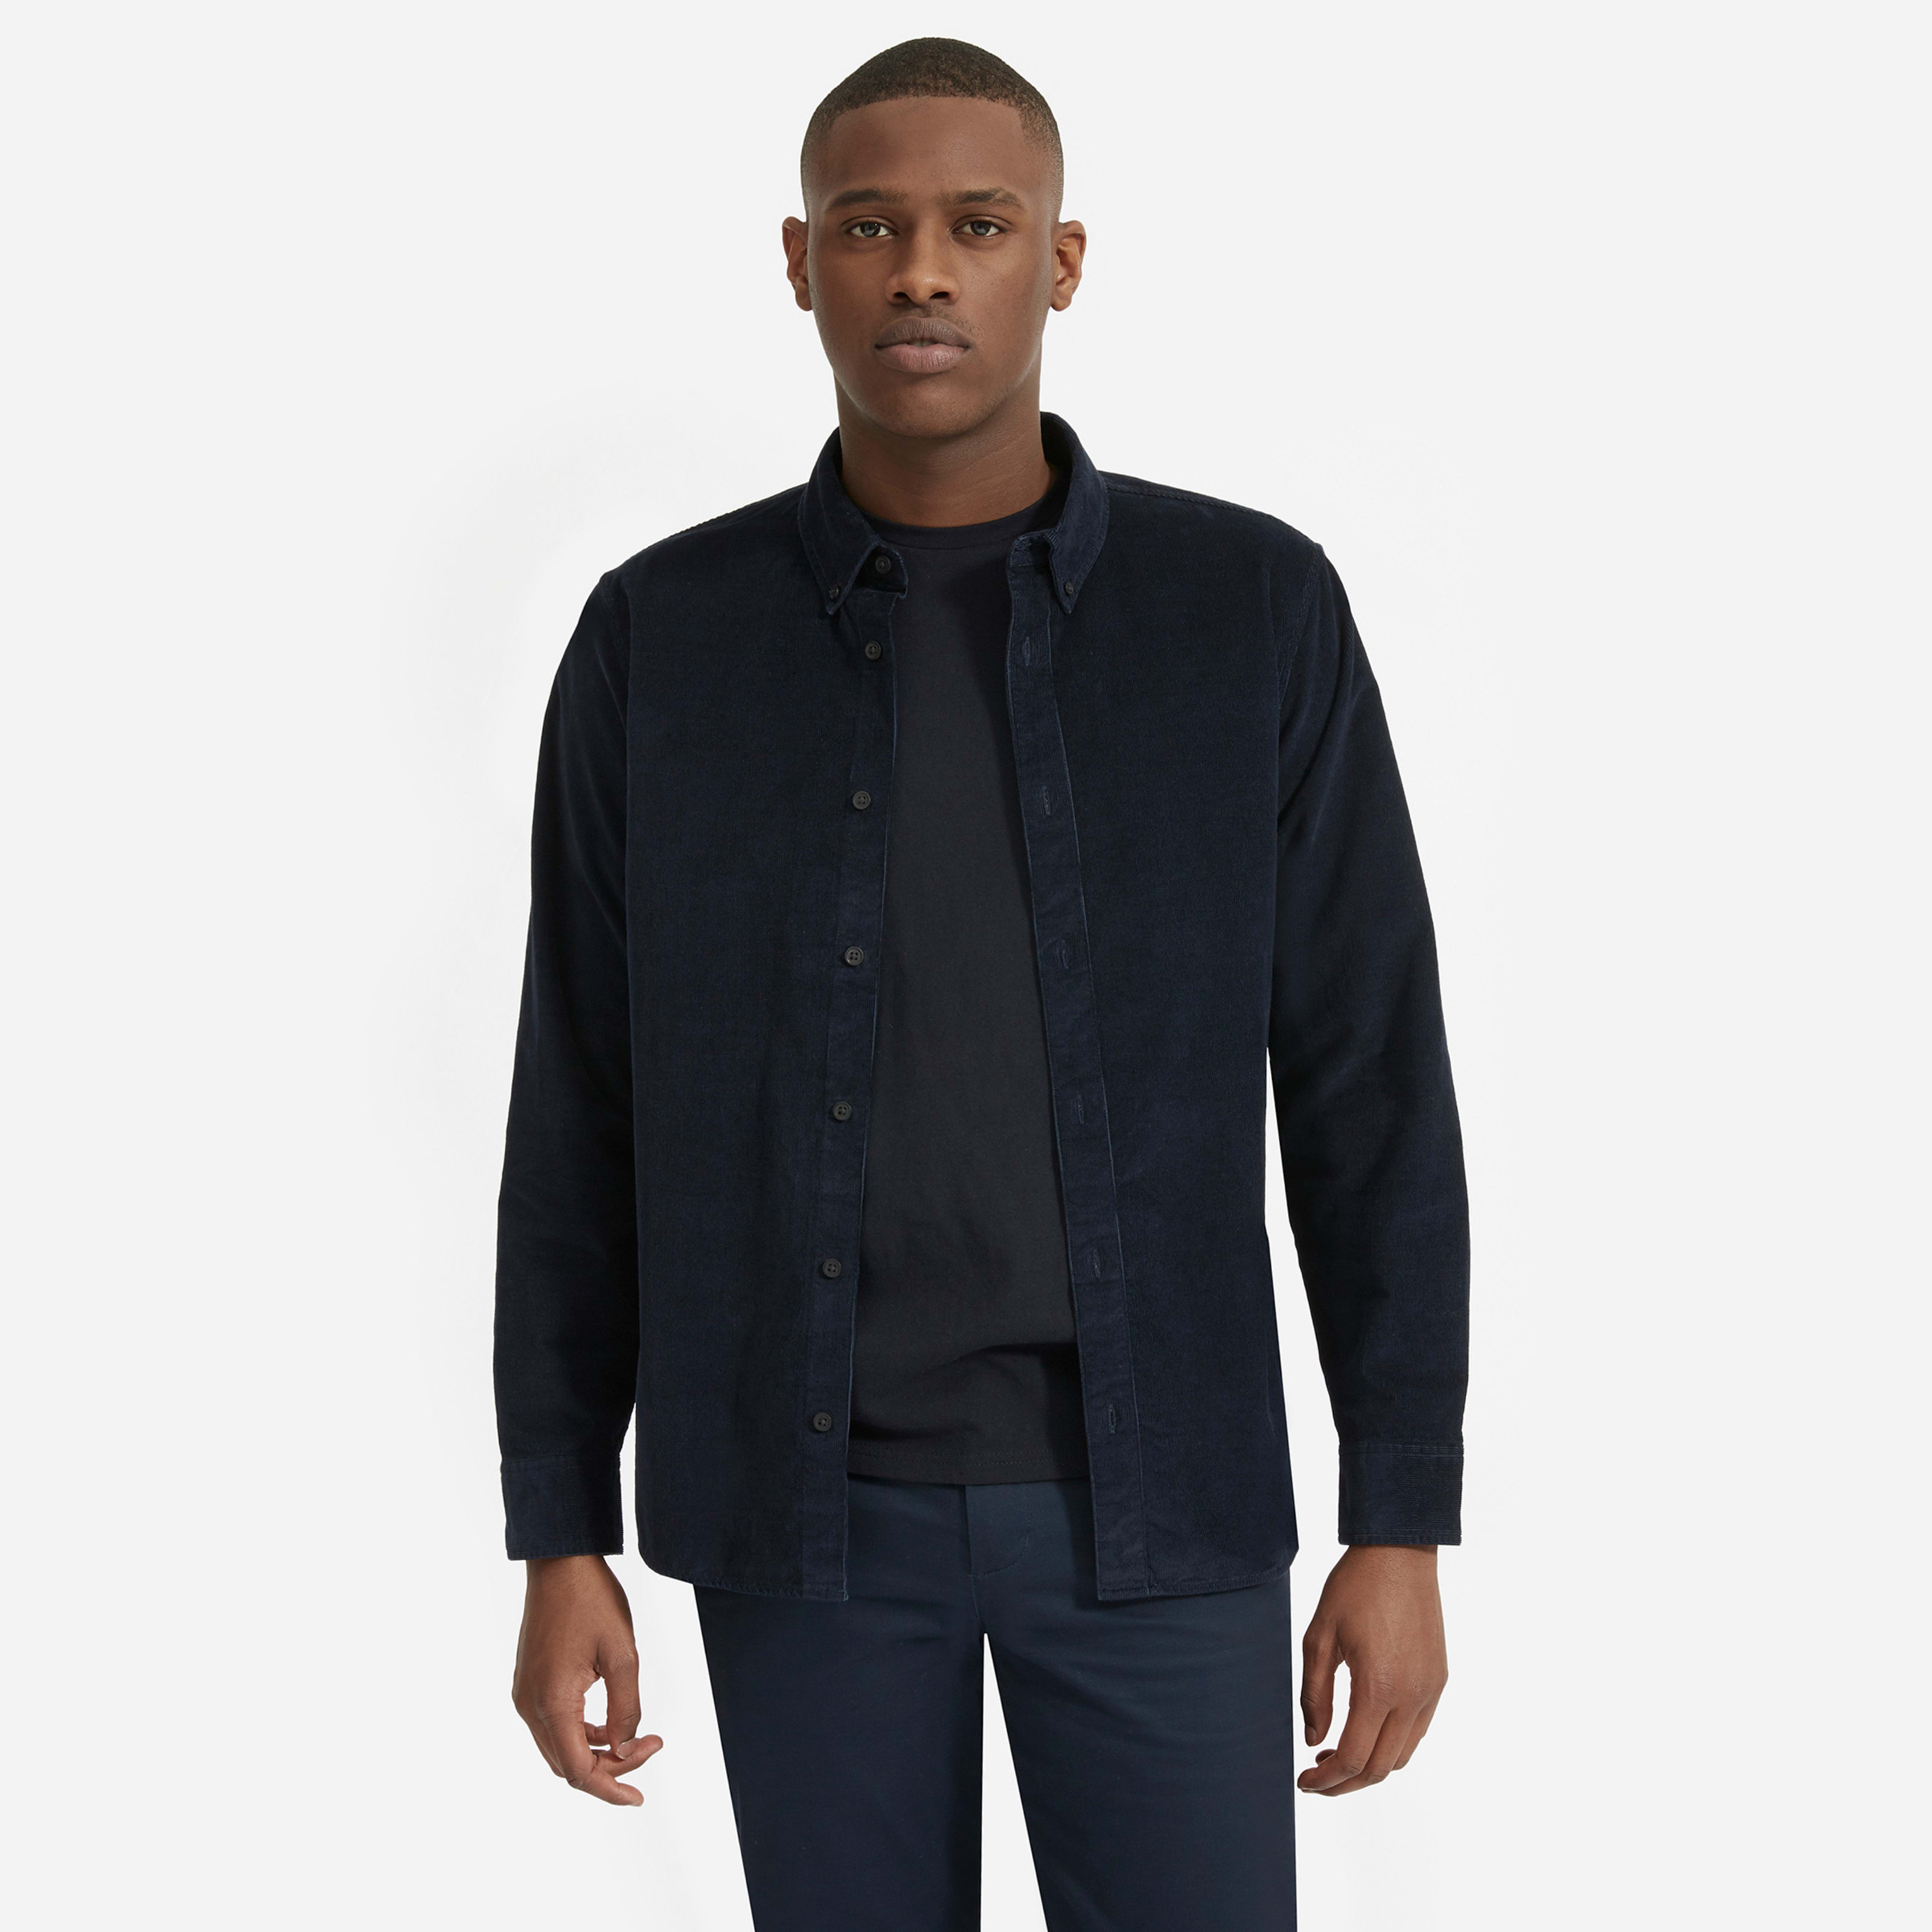 Men's Corduroy Shirt by Everlane in Navy, Size XS